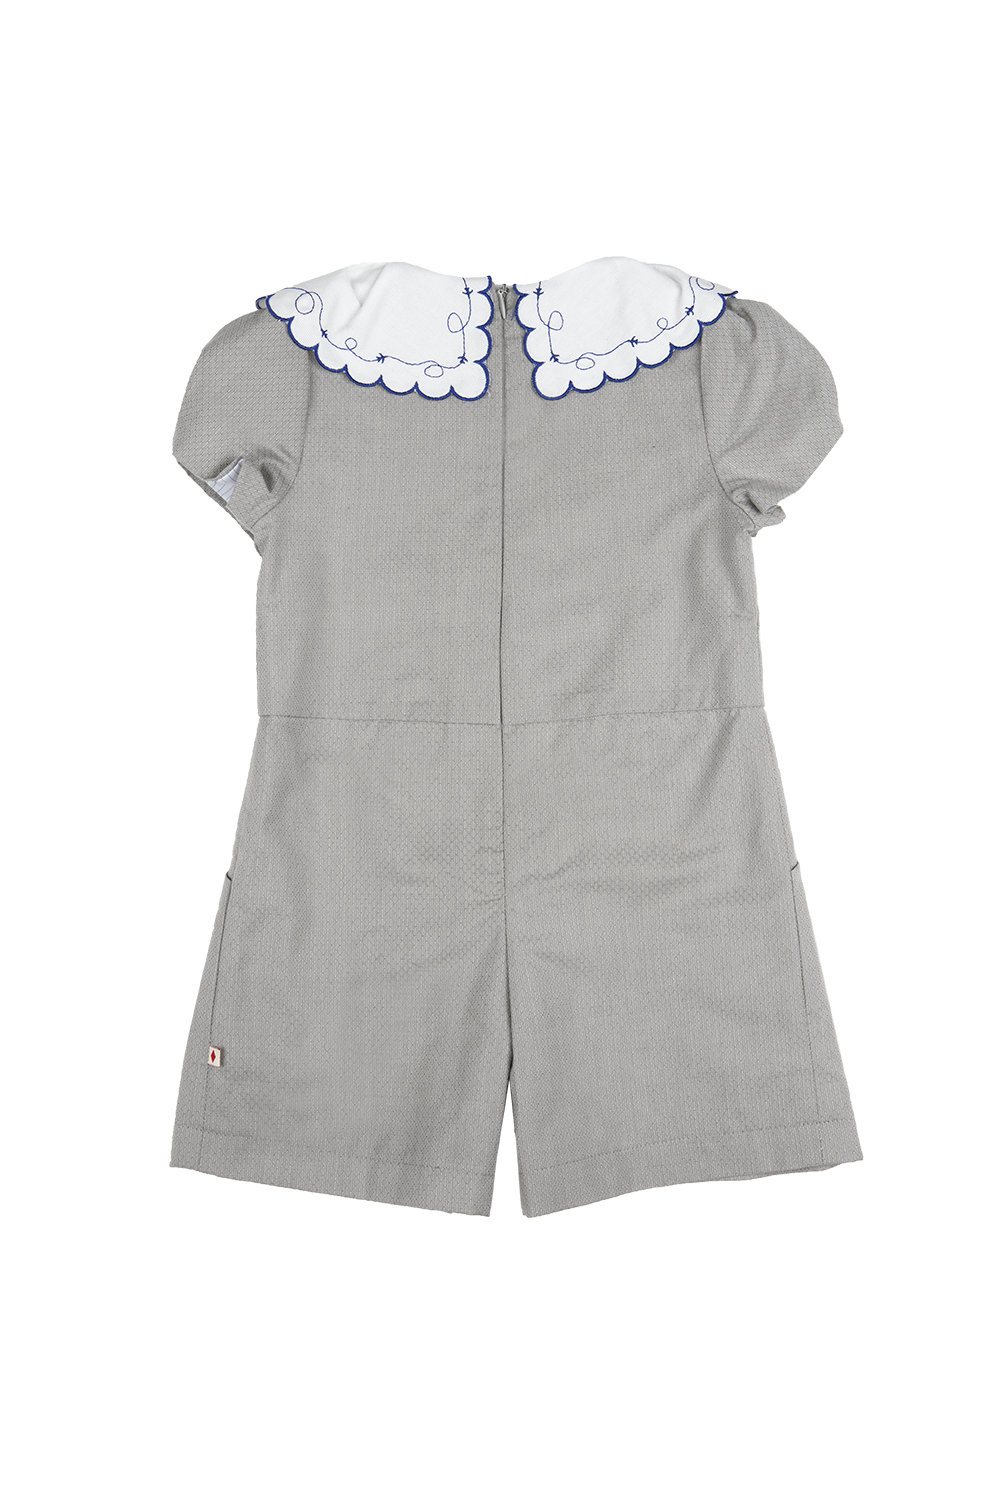 playsuit airplanes collar